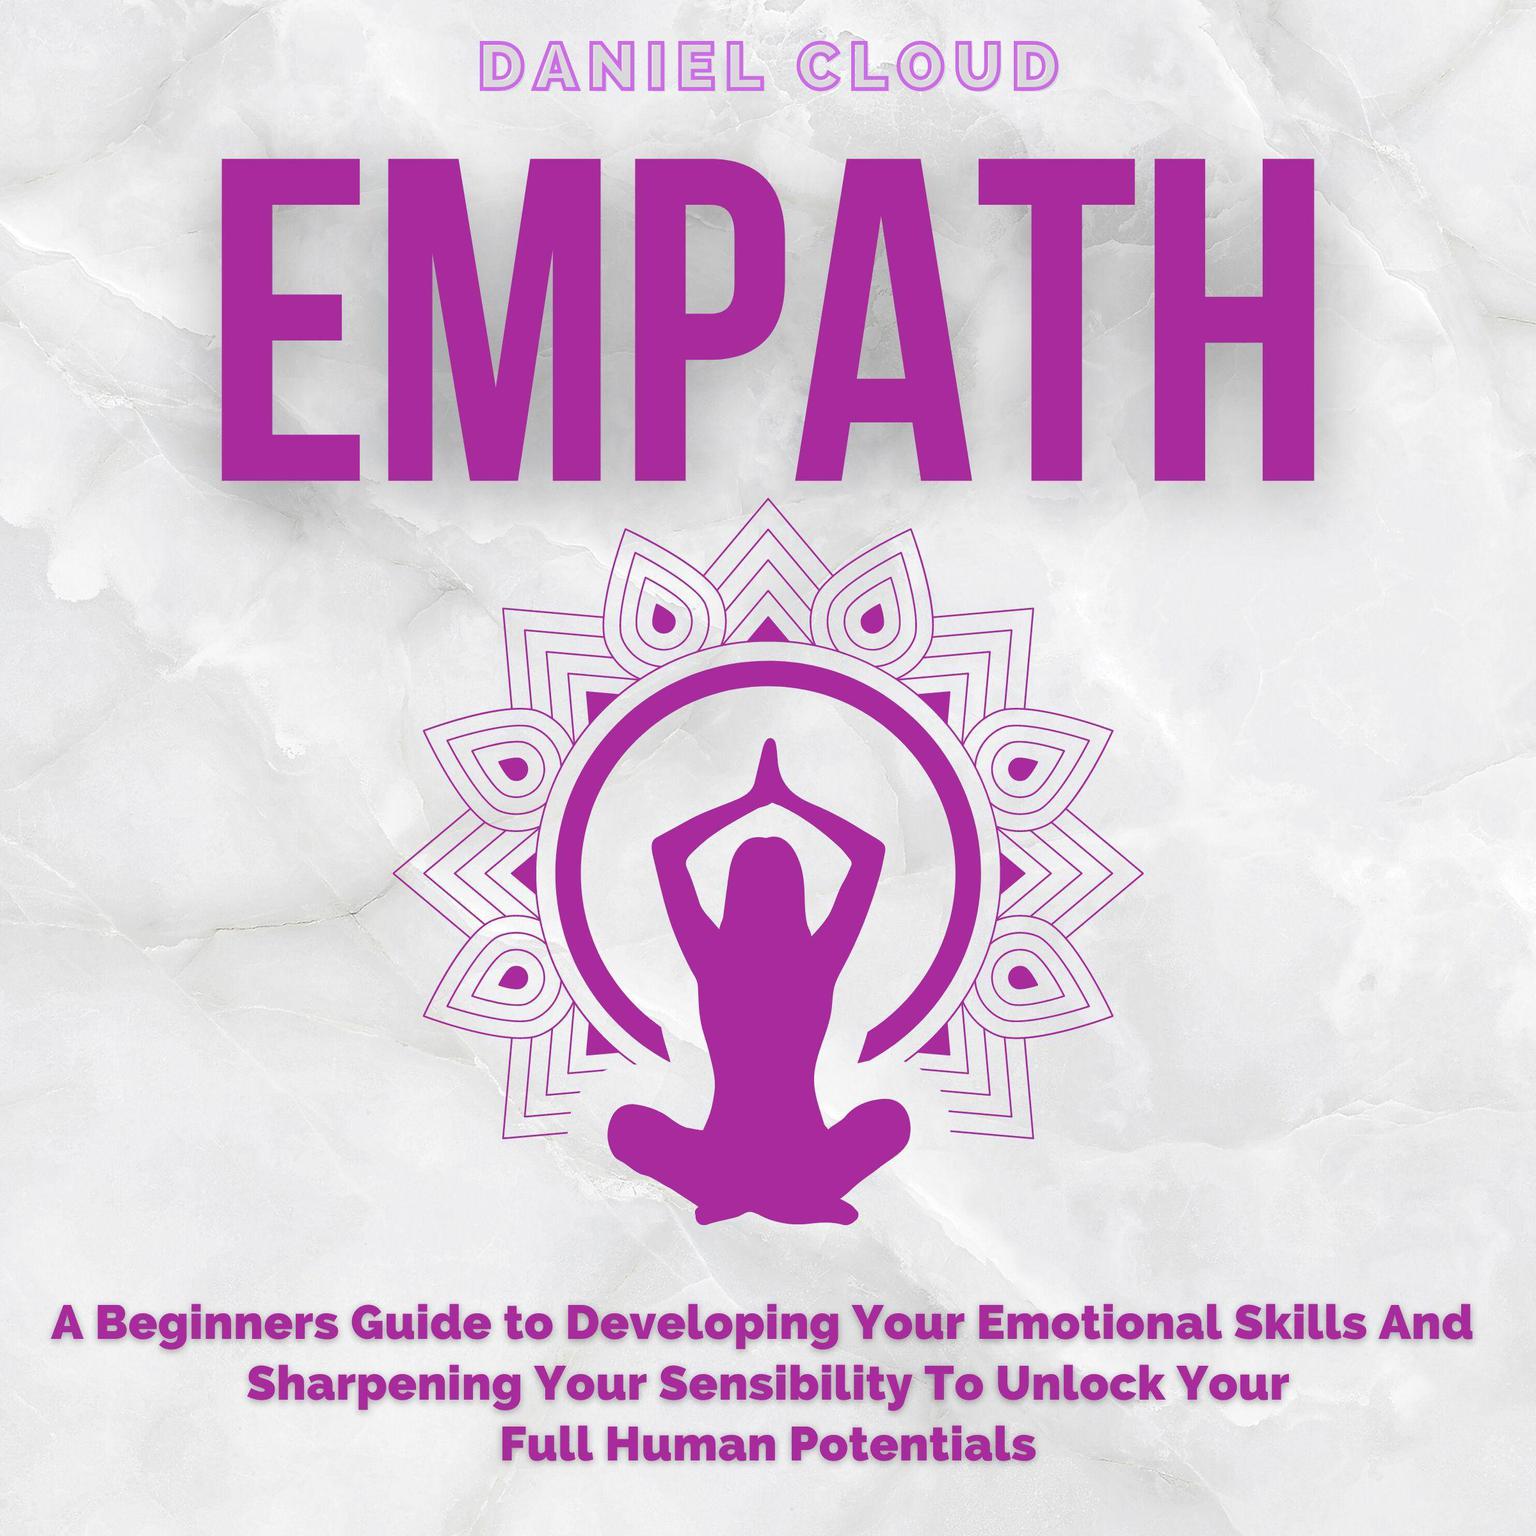 Empath; A Beginners Guide to Developing Your Emotional Skills and Sharpening your Sensibility to Unlock Your Full Human Potentials Audiobook, by Daniel Cloud